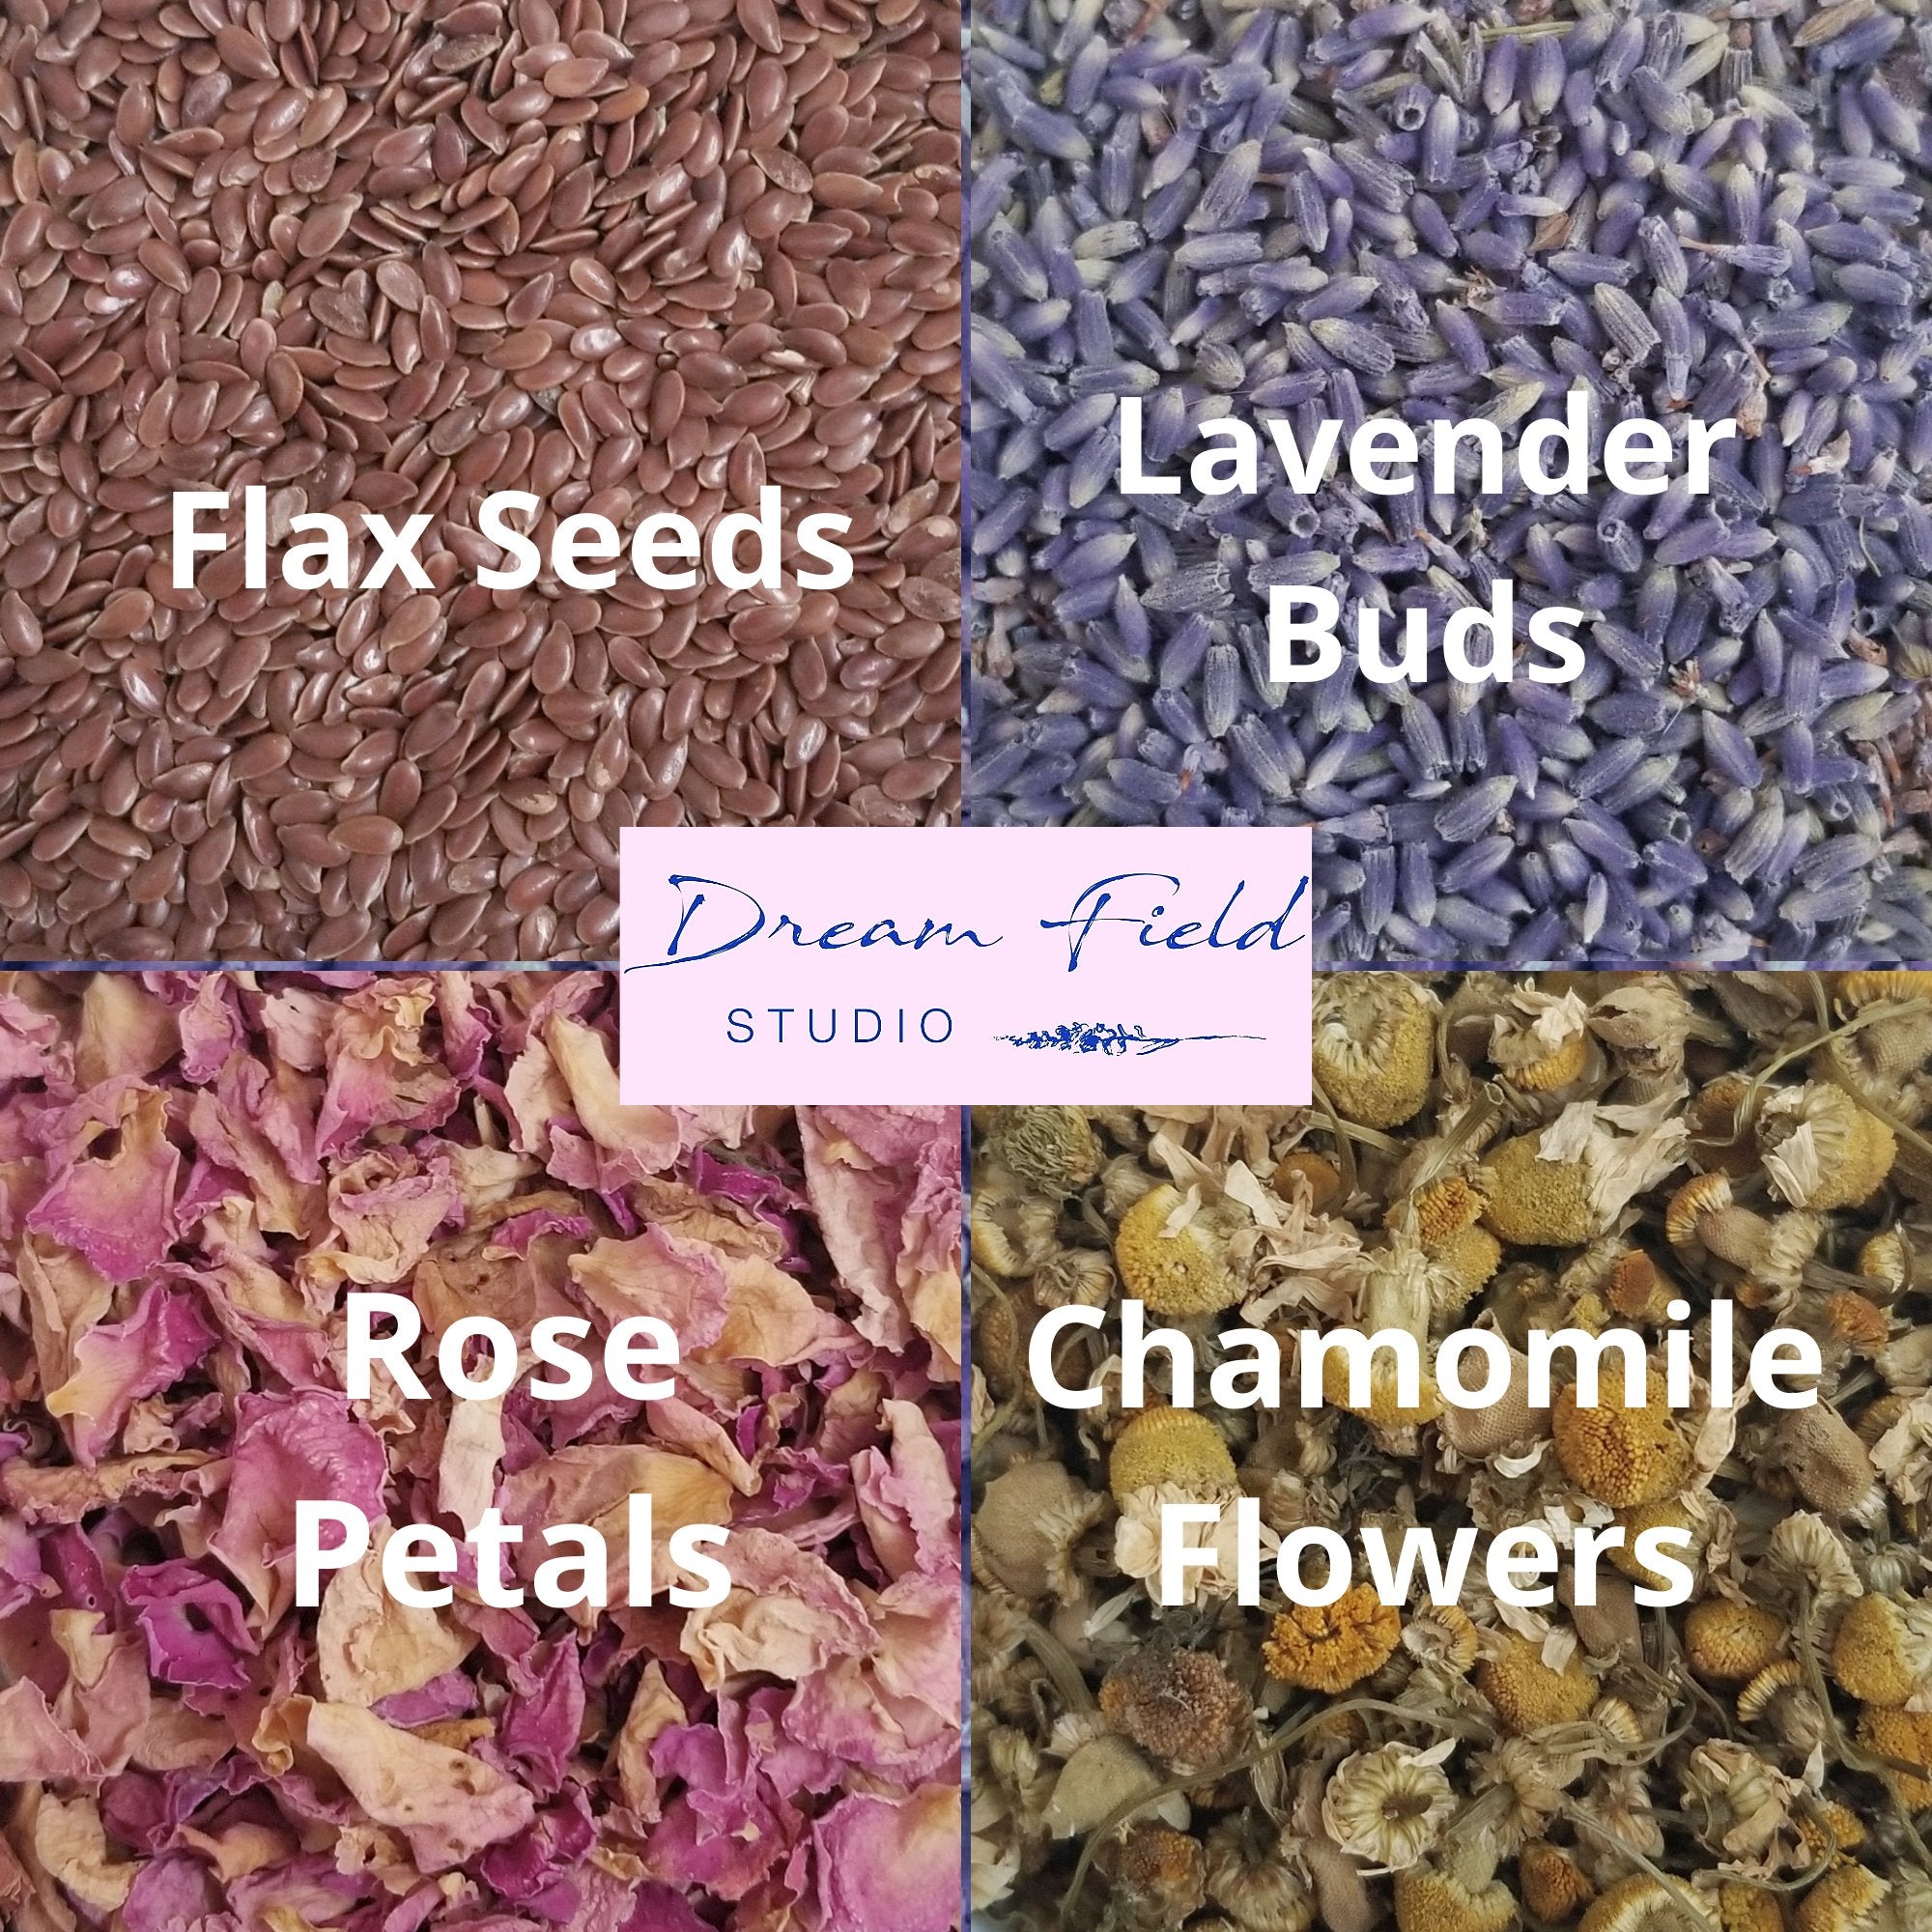 Infographic of flax seeds, lavender buds, rose petals, chamomile flowers by Dream Field Studio